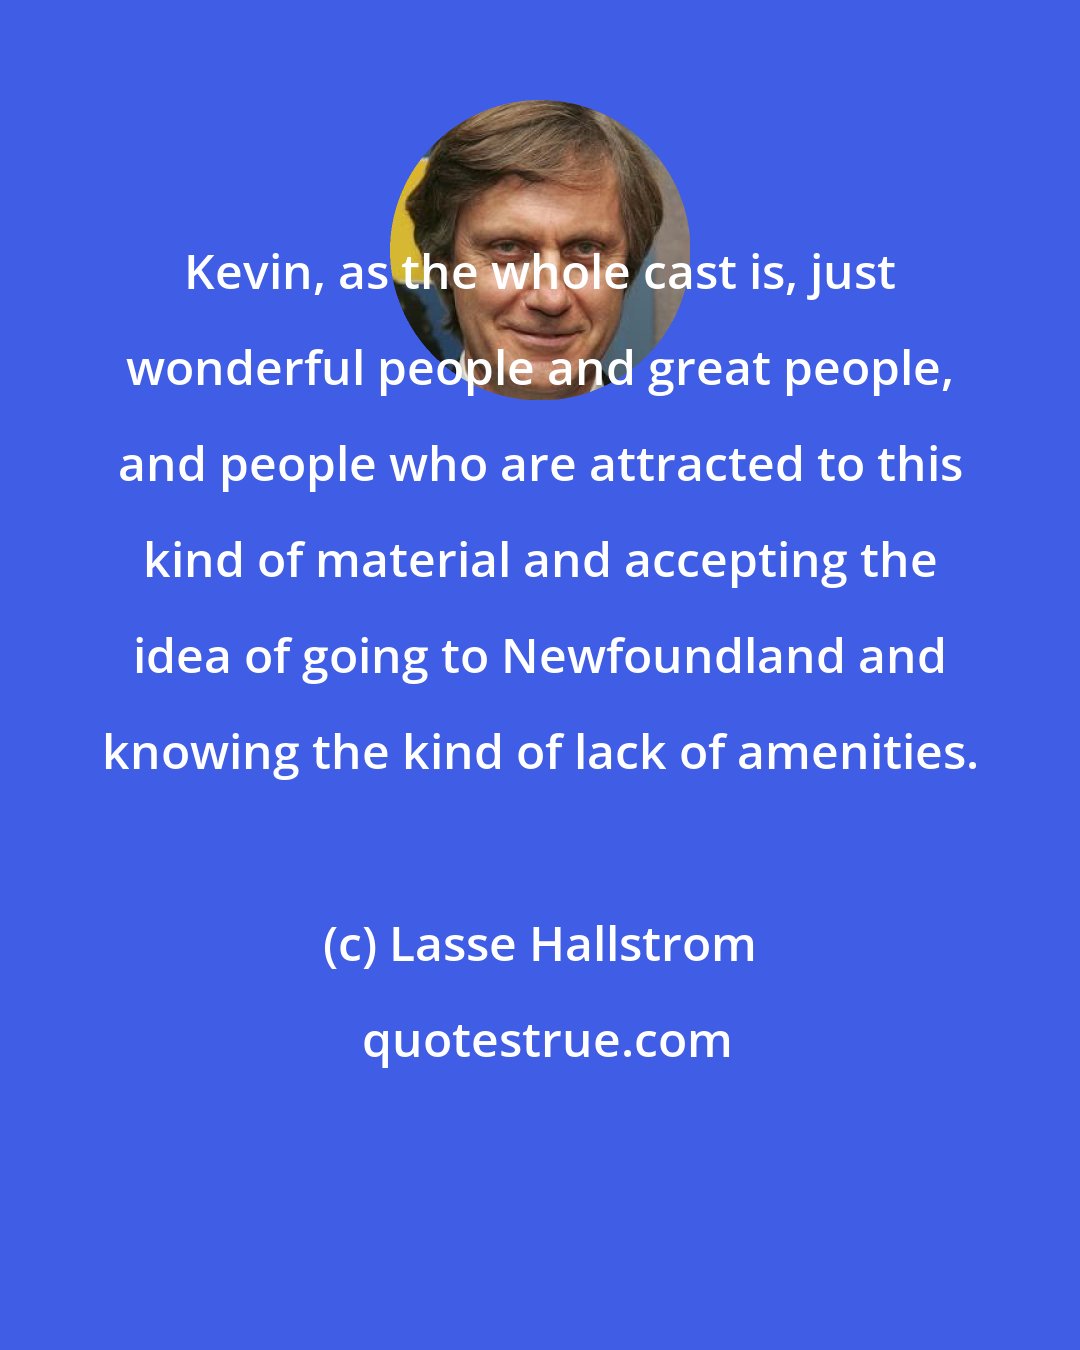 Lasse Hallstrom: Kevin, as the whole cast is, just wonderful people and great people, and people who are attracted to this kind of material and accepting the idea of going to Newfoundland and knowing the kind of lack of amenities.